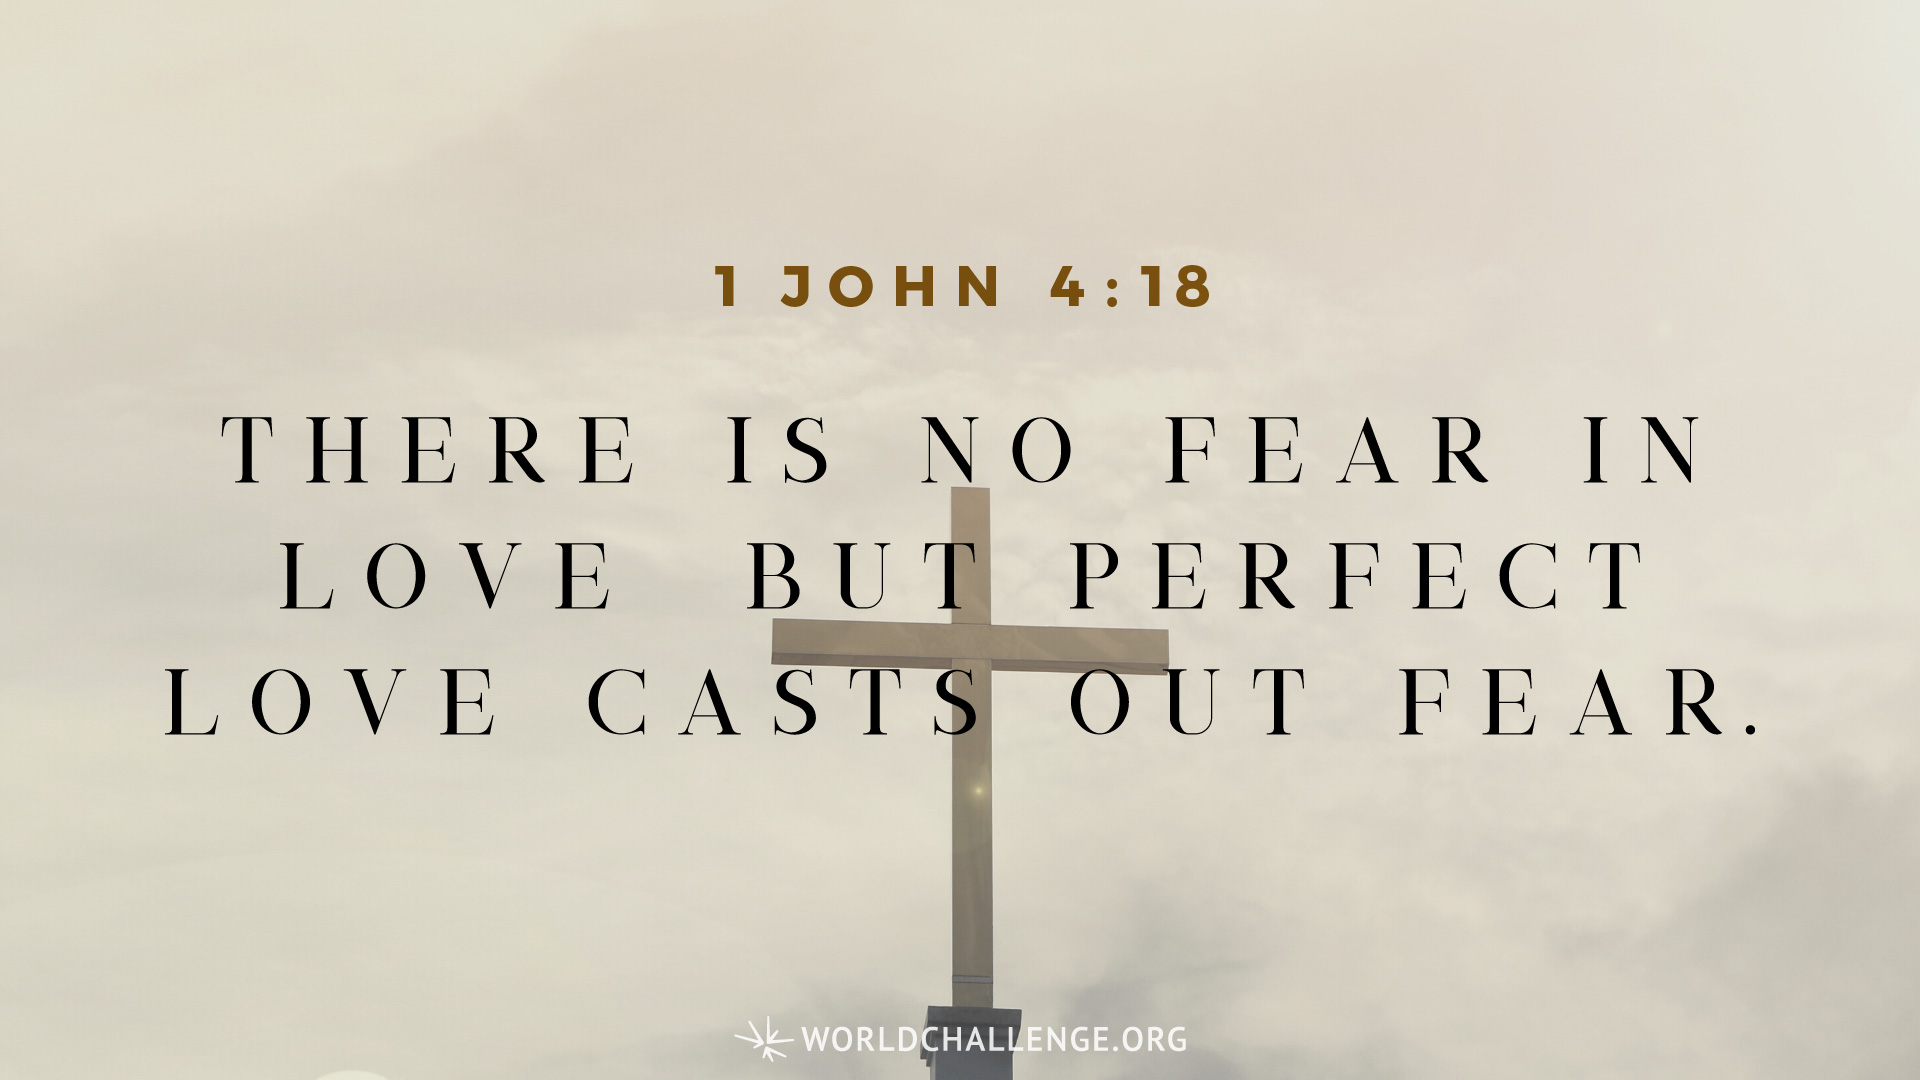 There is no fear in love, but perfect love casts out fear because